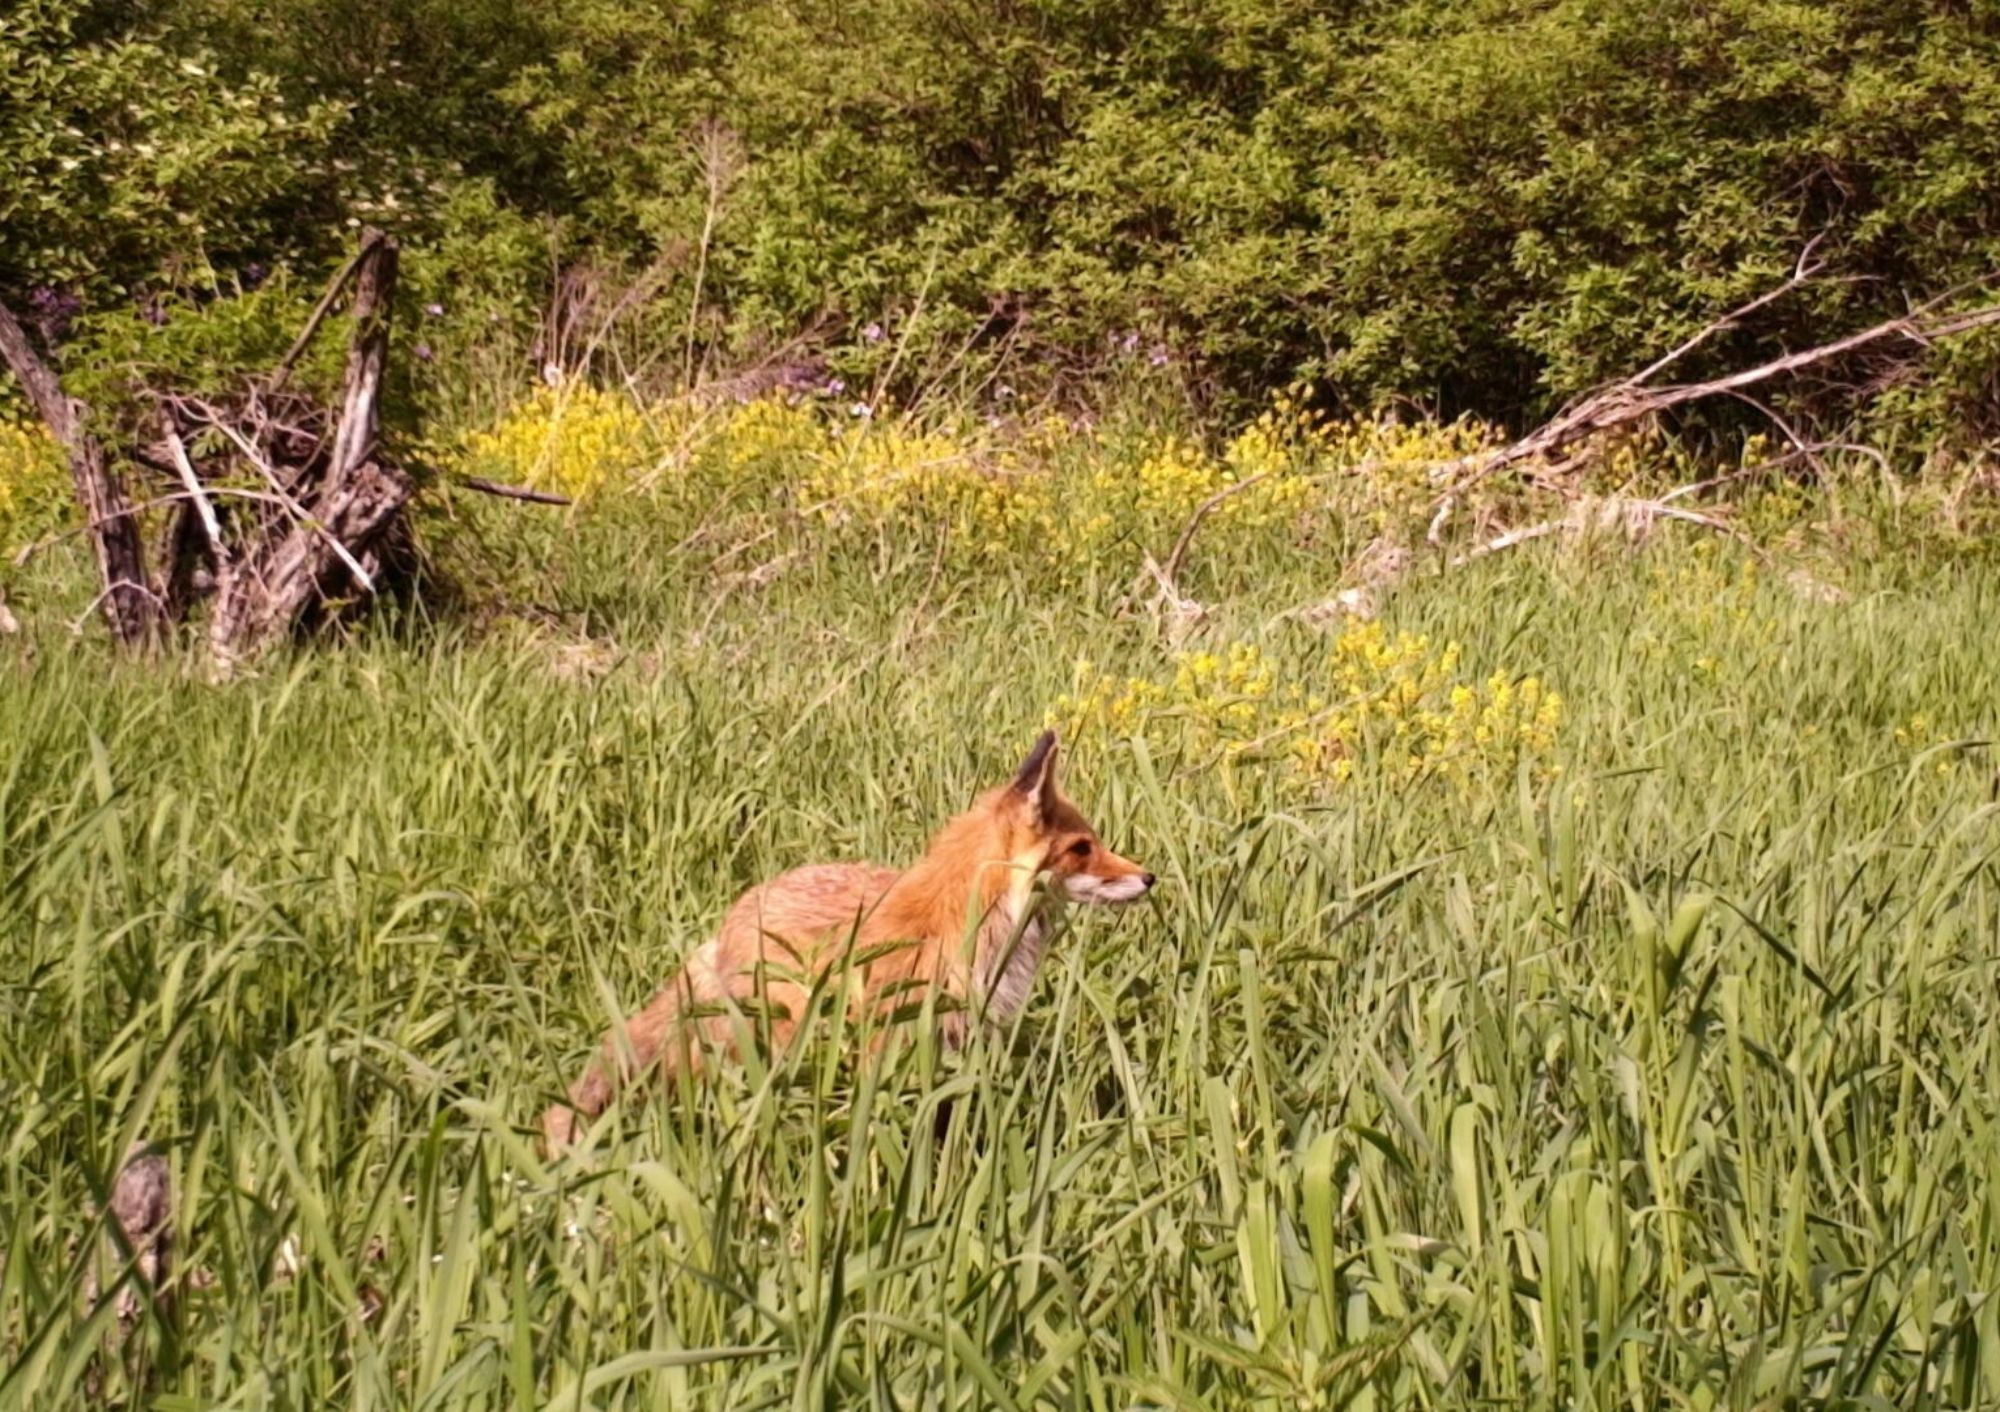 A red fox in the middle of a green field